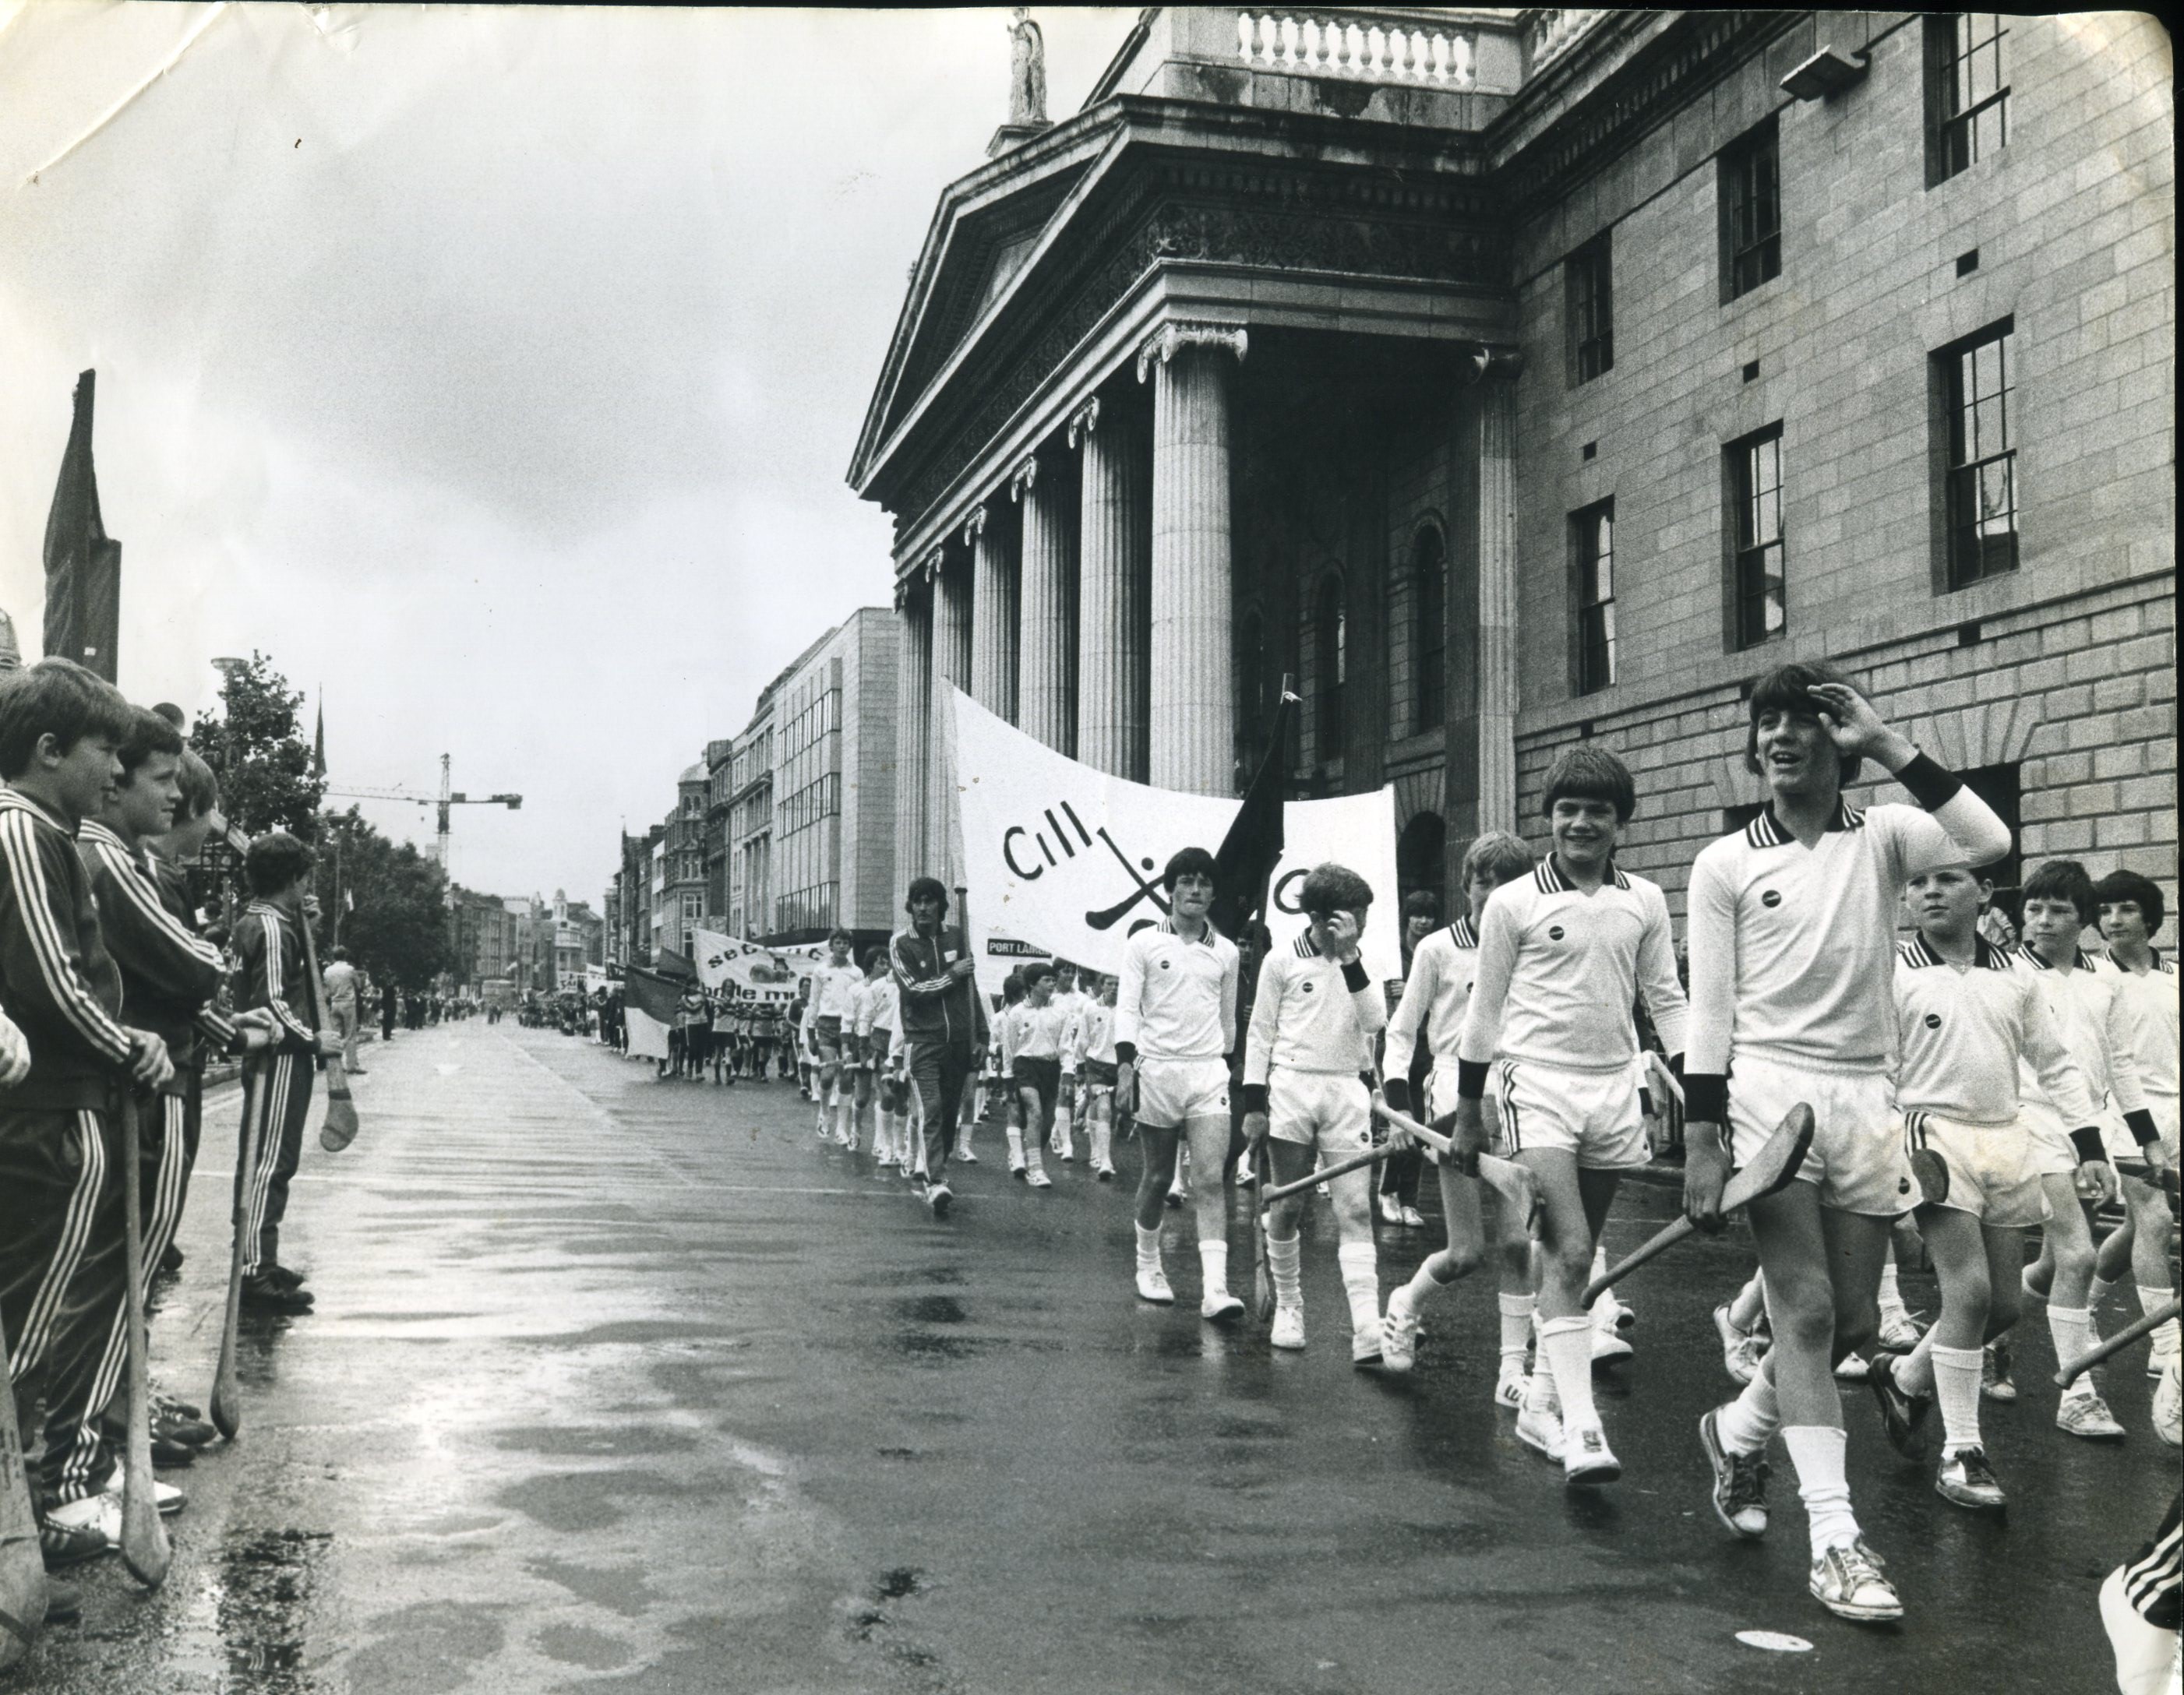 GAA clubs participating in one of the Tóstal Parades. An Tóstal was set up in 1953 to promote tourism in Ireland by acting as an annual showcase for Irish language and culture.